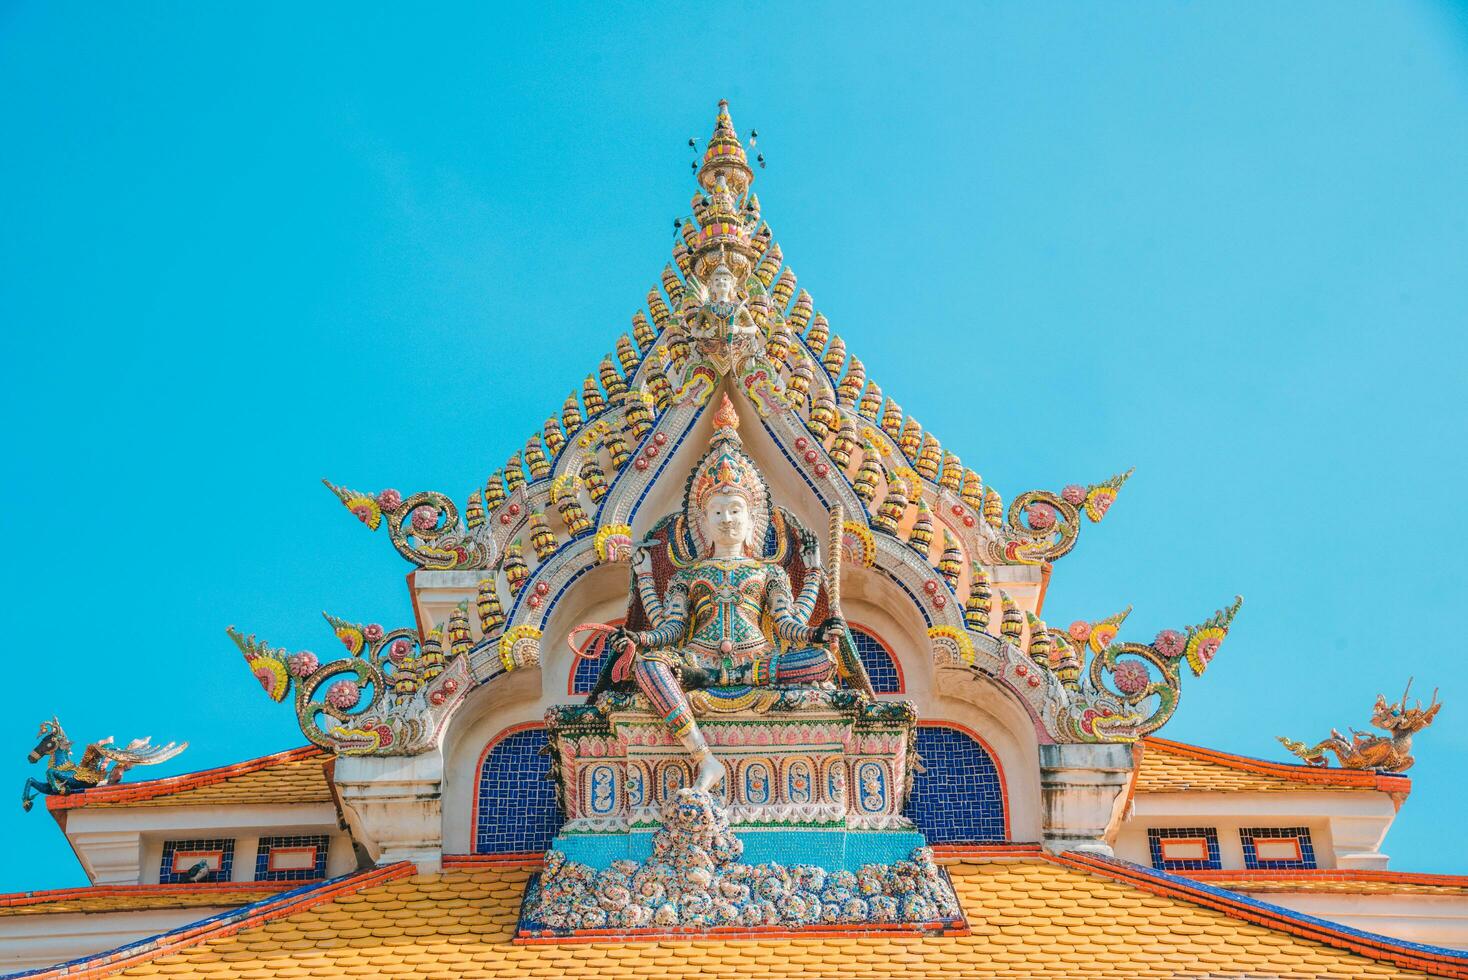 The Architecture Of  Wat Pariwas,,Beautiful Temple In Bangkok Or,Temple In Thailand. photo